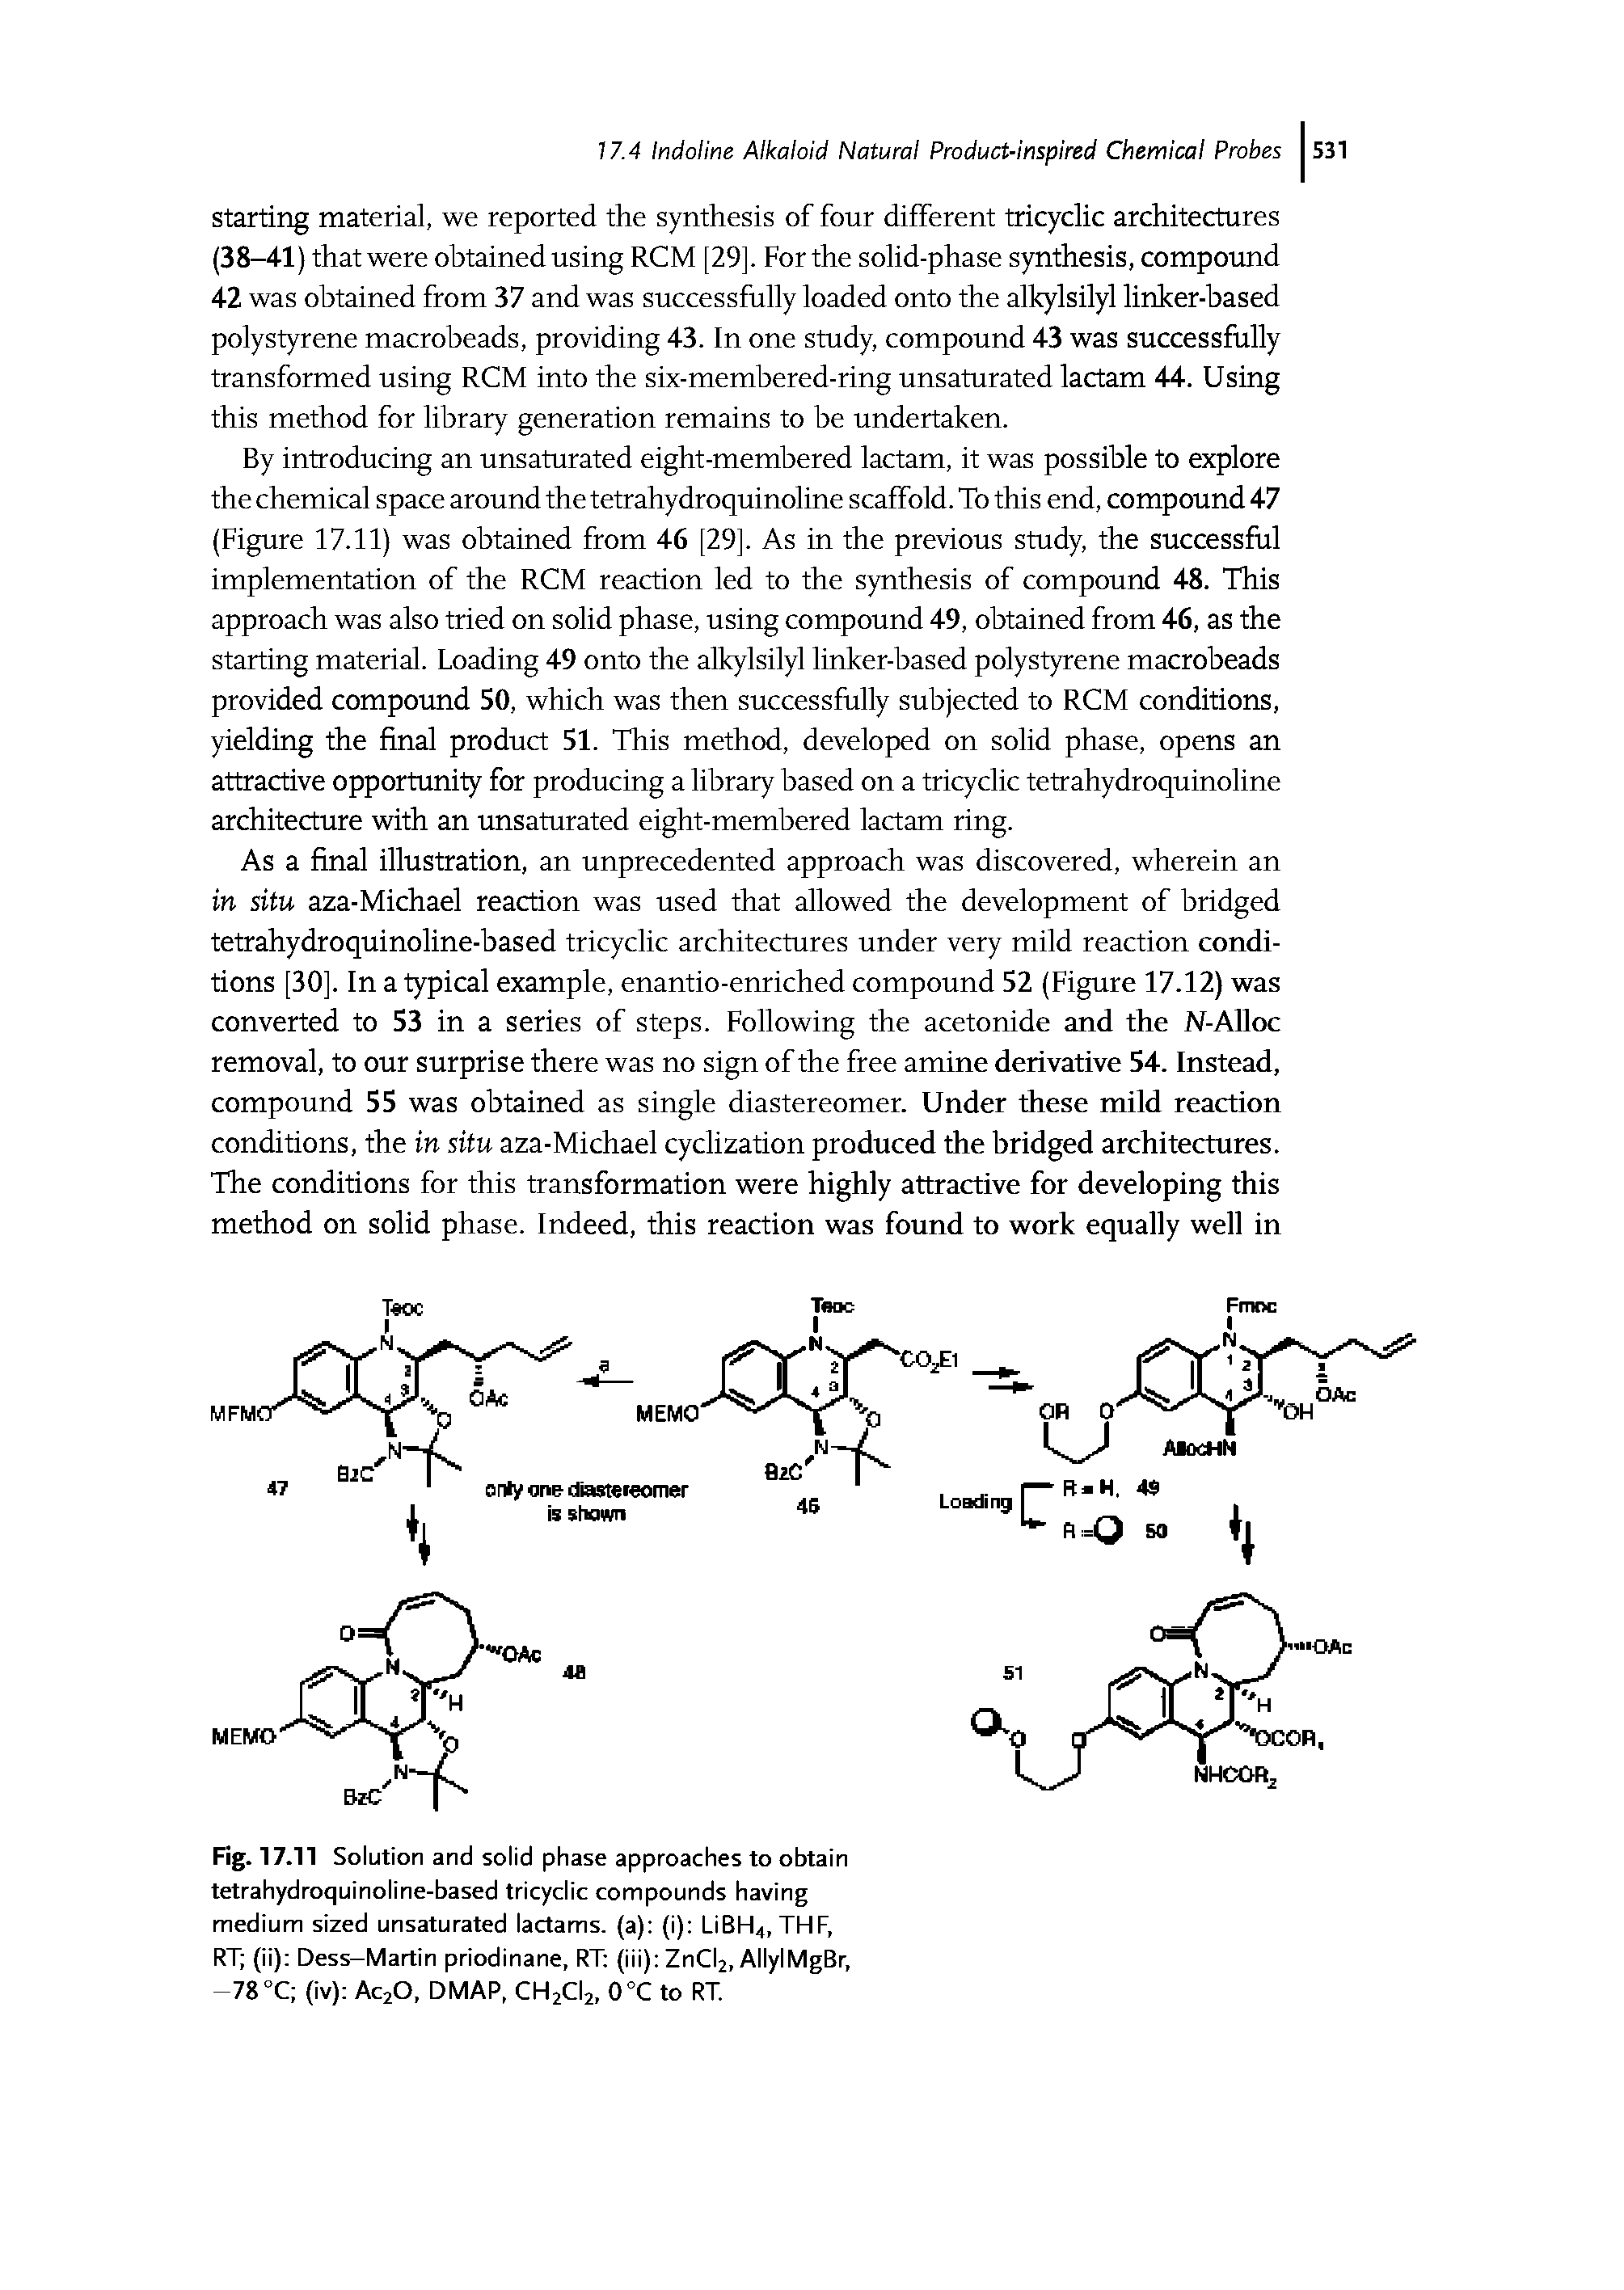 Fig. 17.11 Solution and solid phase approaches to obtain tetrahydroquinoline-based tricyclic compounds having medium sized unsaturated lactams, (a) (i) LiBH4, THF, RT (ii) Dess-Martin priodinane, RT (iii) ZnCl2, AllylMgBr, -78 °Q (iv) AcjO, DMAP, CHjClj, 0°C to RT.